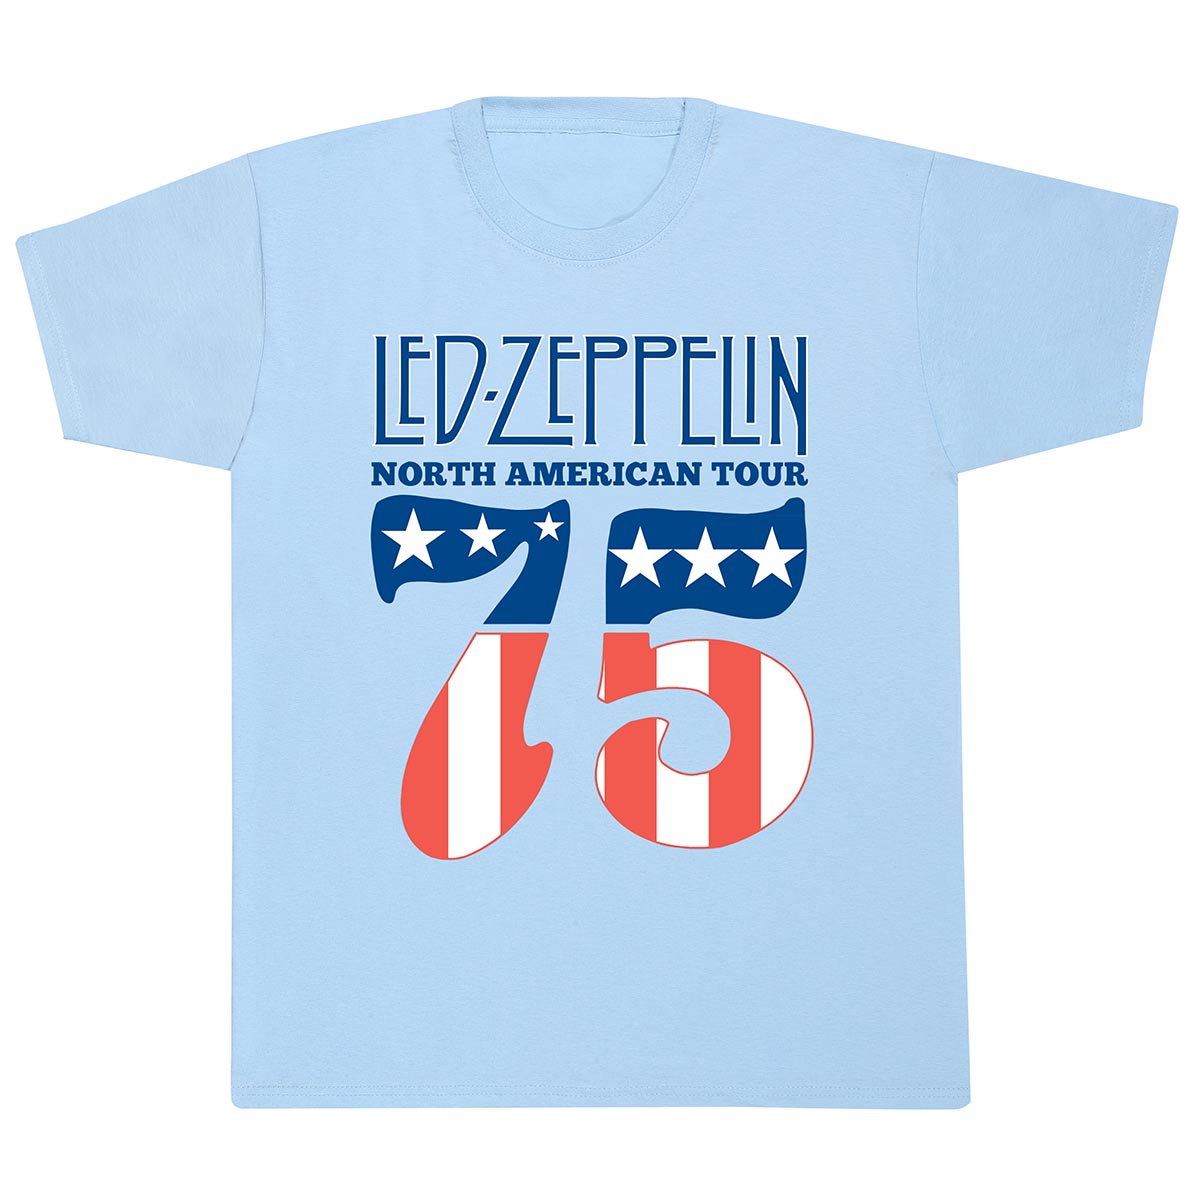 Led Zeppelin 1975 North American Tour T-Shirt